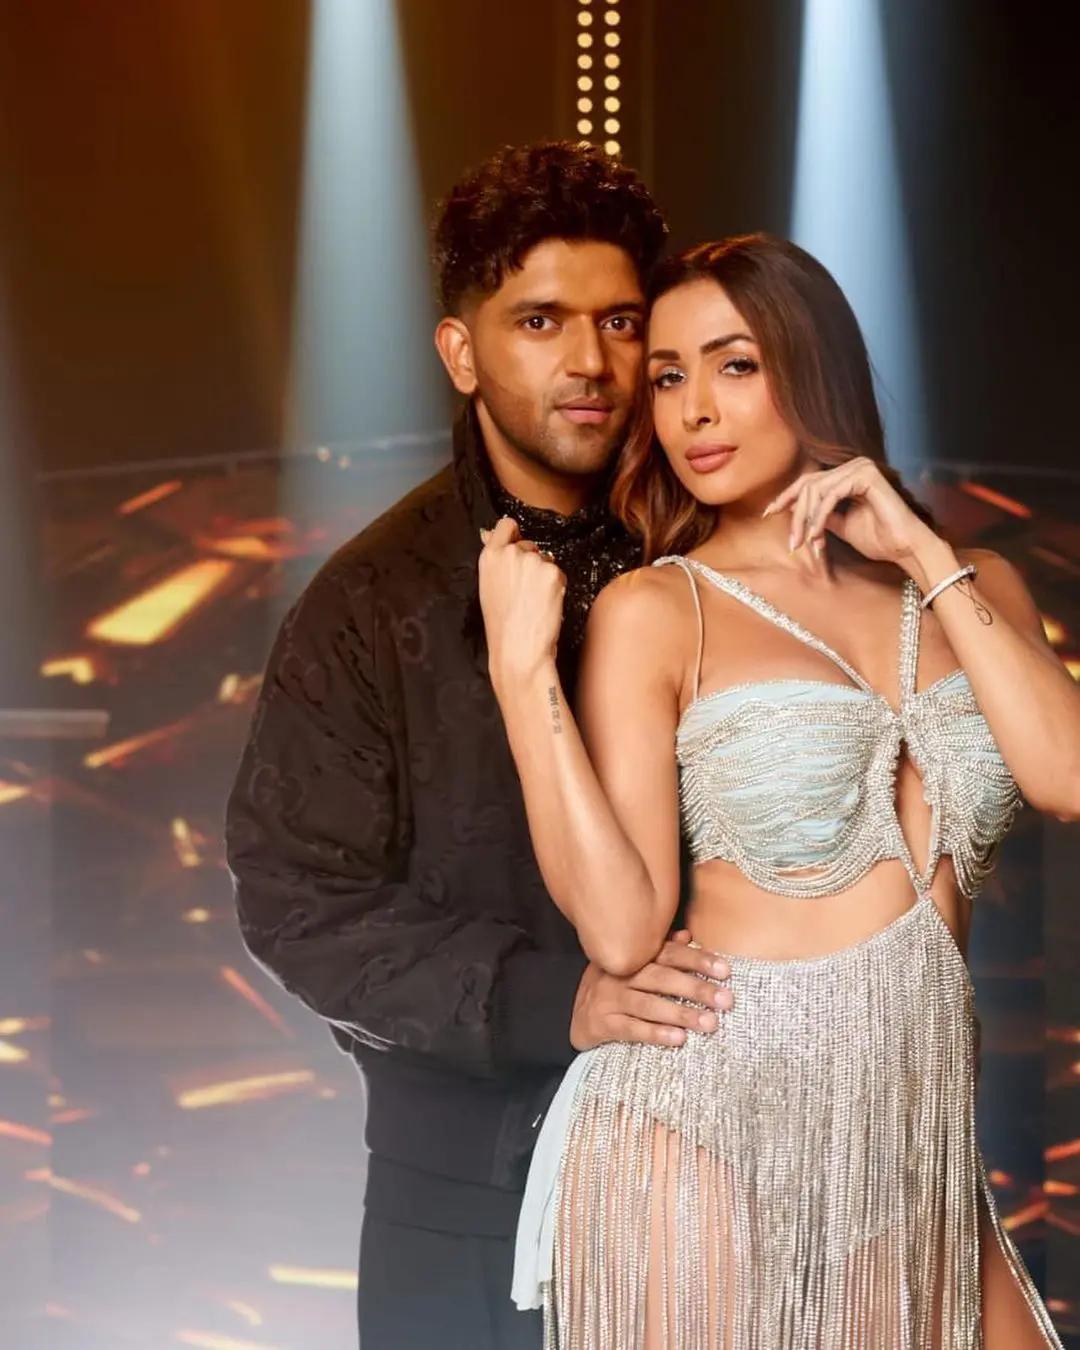 Malaika Arora's latest single, 'Tera Khayal', featuring Guru Randhawa, combines her timeless elegance with contemporary beats, showcasing her versatility as an artist. With its catchy tune and stylish choreography, the song reflects Malaika's enduring appeal in the music industry